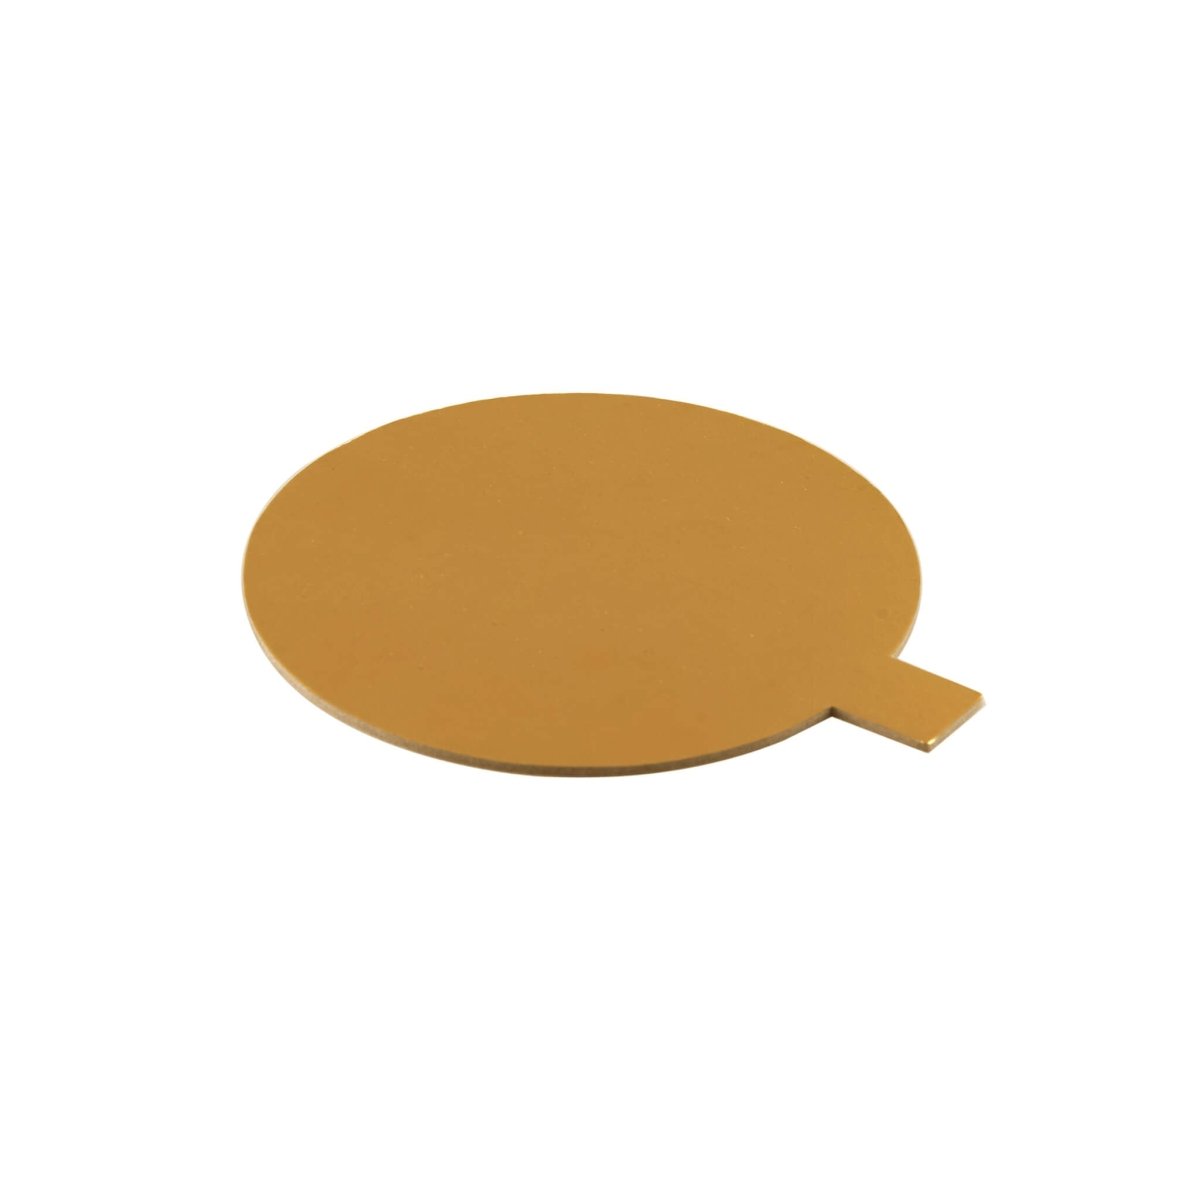 Round Gold Single Cake Piece Board 100 Pieces - hotpackwebstore.com - Cake Boards